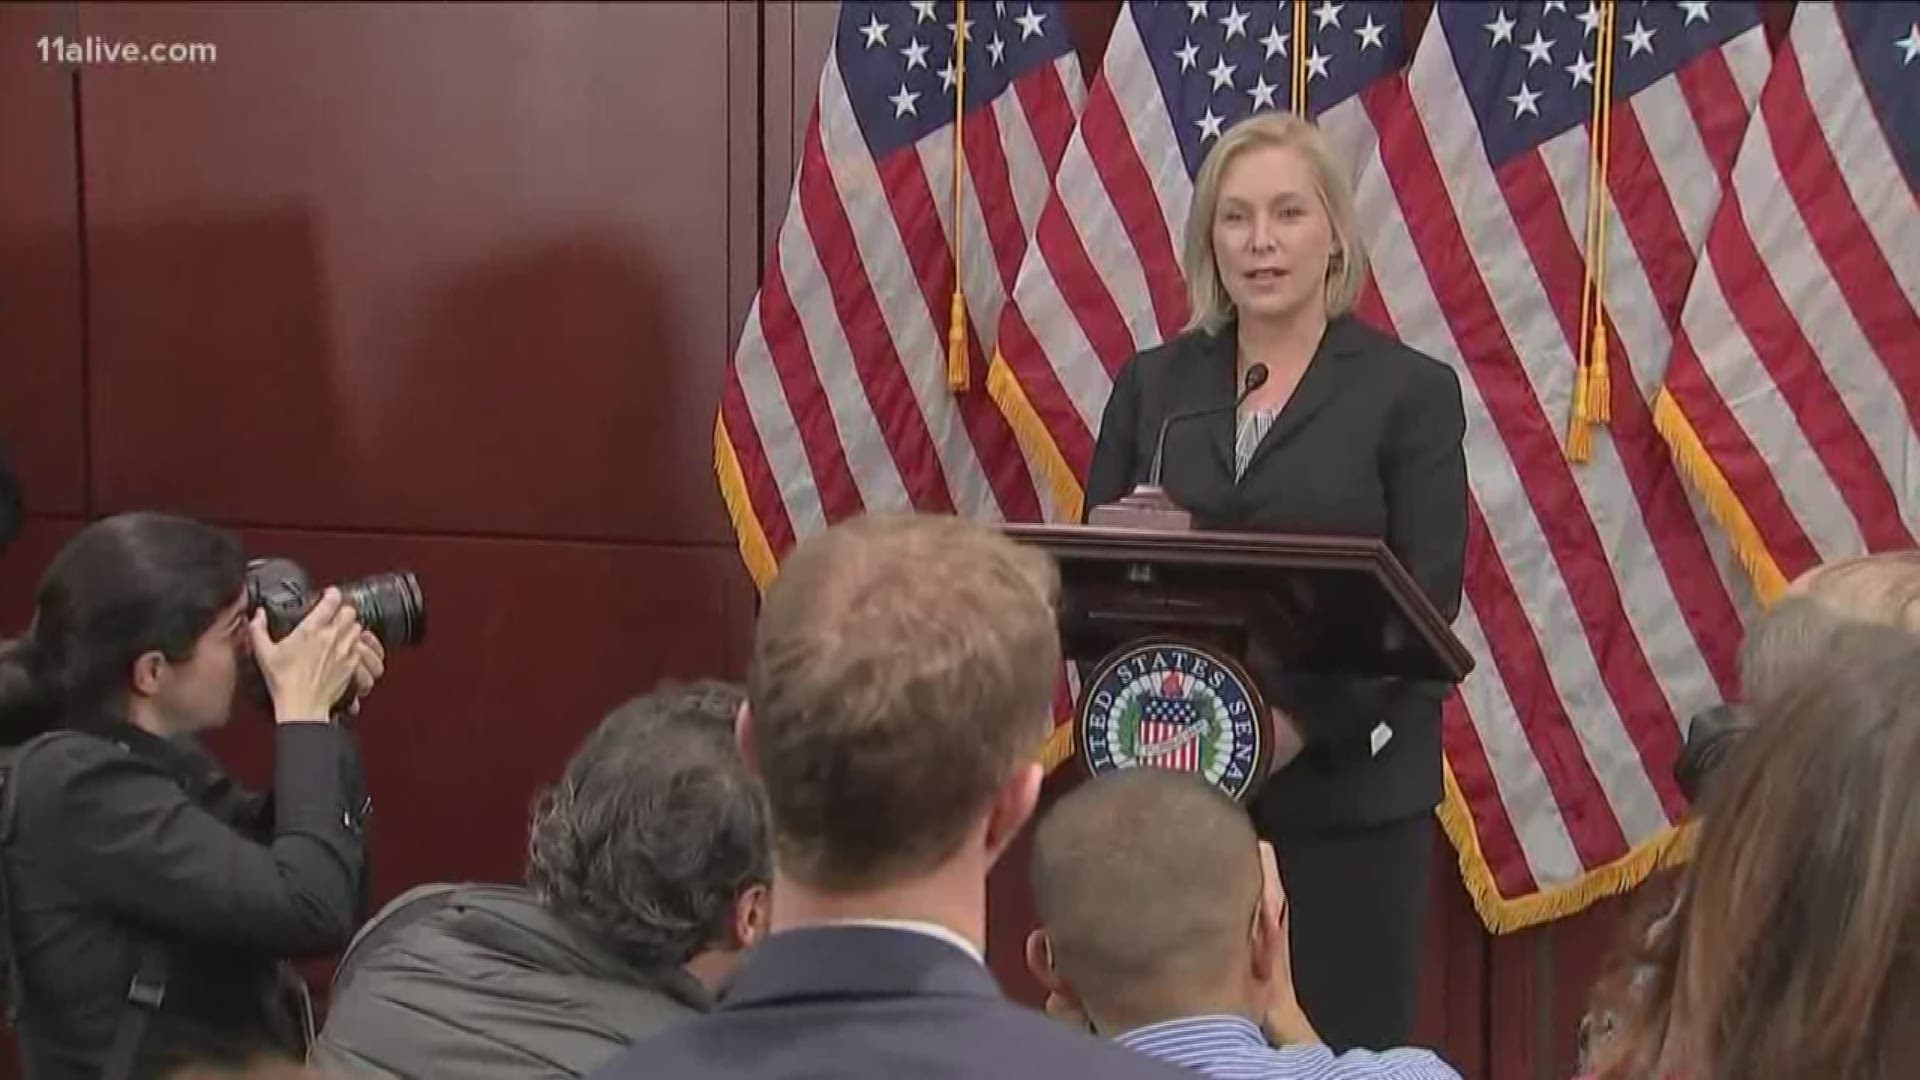 Voters would register to receive hundreds of dollars from the federal government to contribute to elections. Sen. Kirsten Gillibrand, a Democratic presidential candidate, is proposing it as a way to combat corruption.